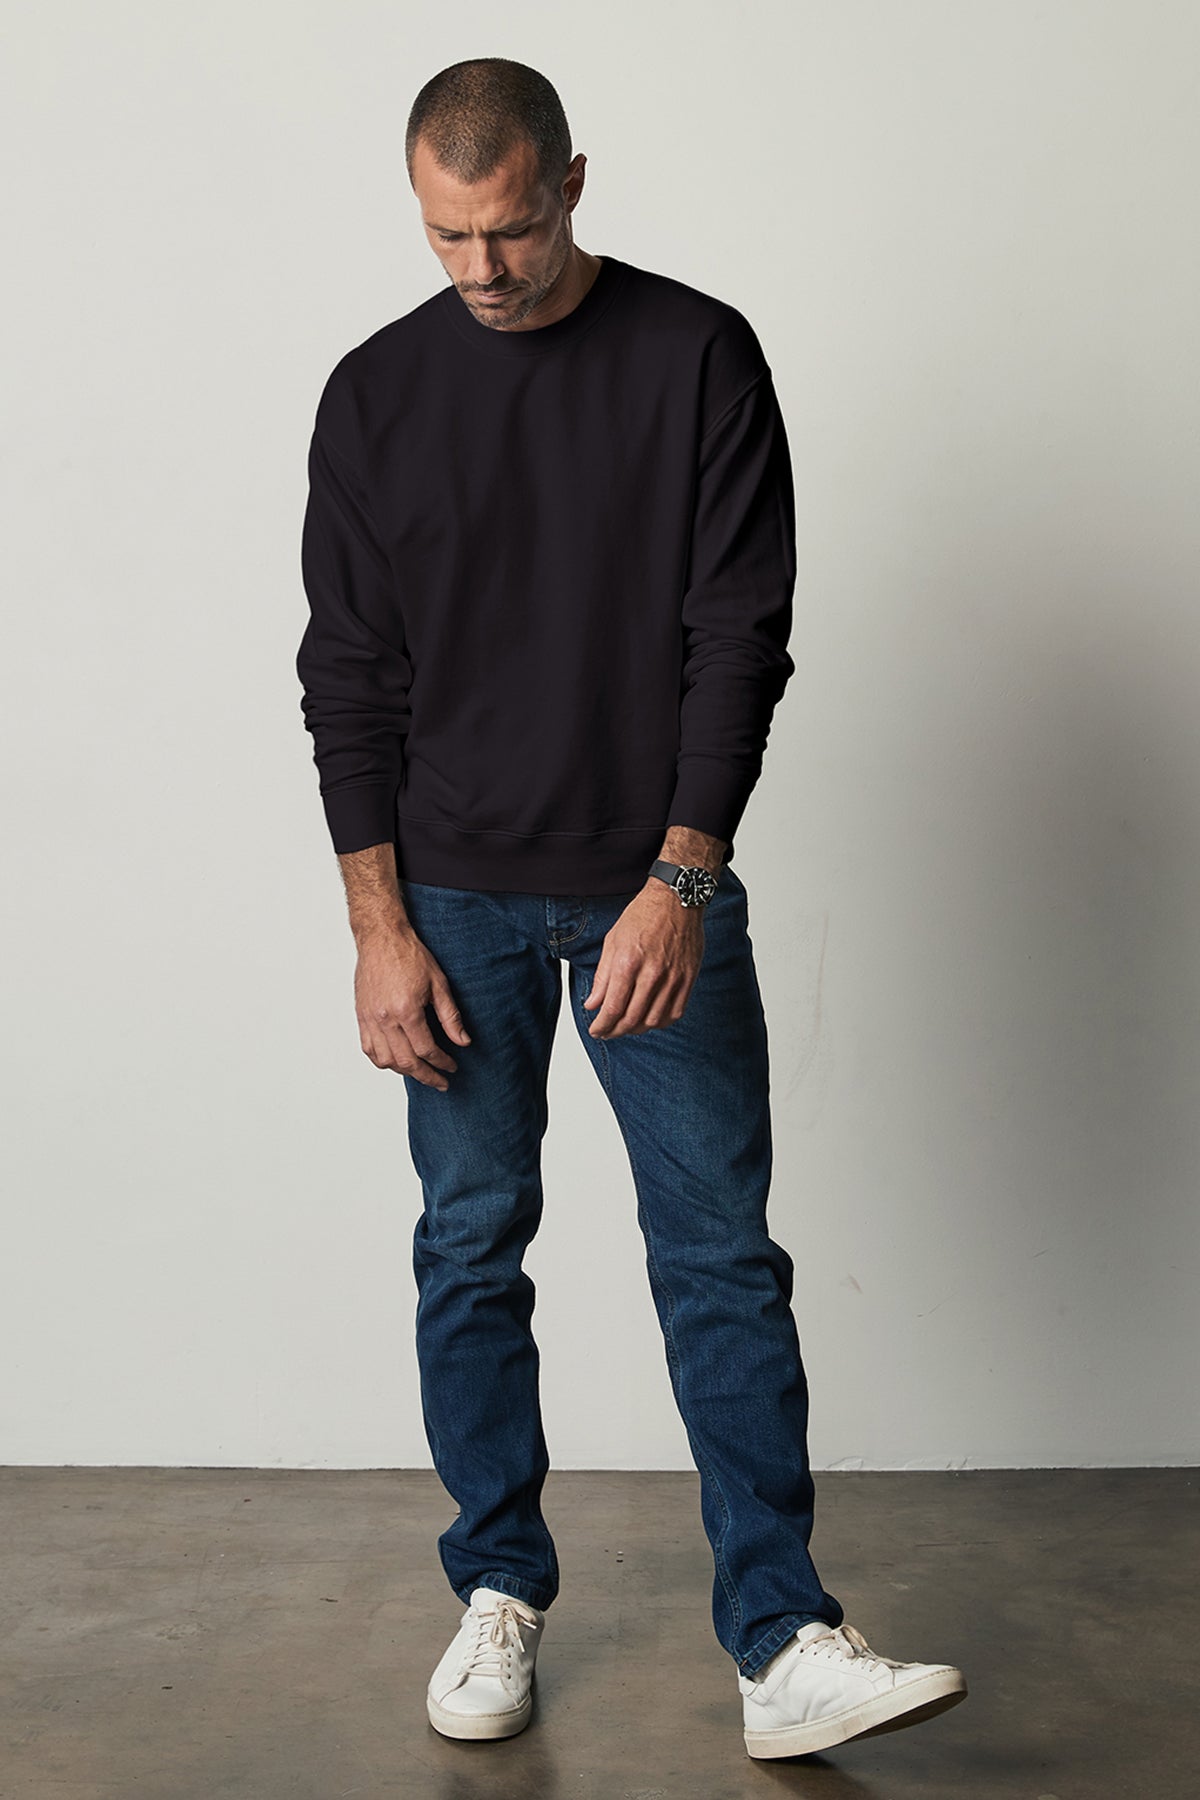 Sirus Crew Neck Sweatshirt in black with blue denim and sneakers full length front-26496370540737